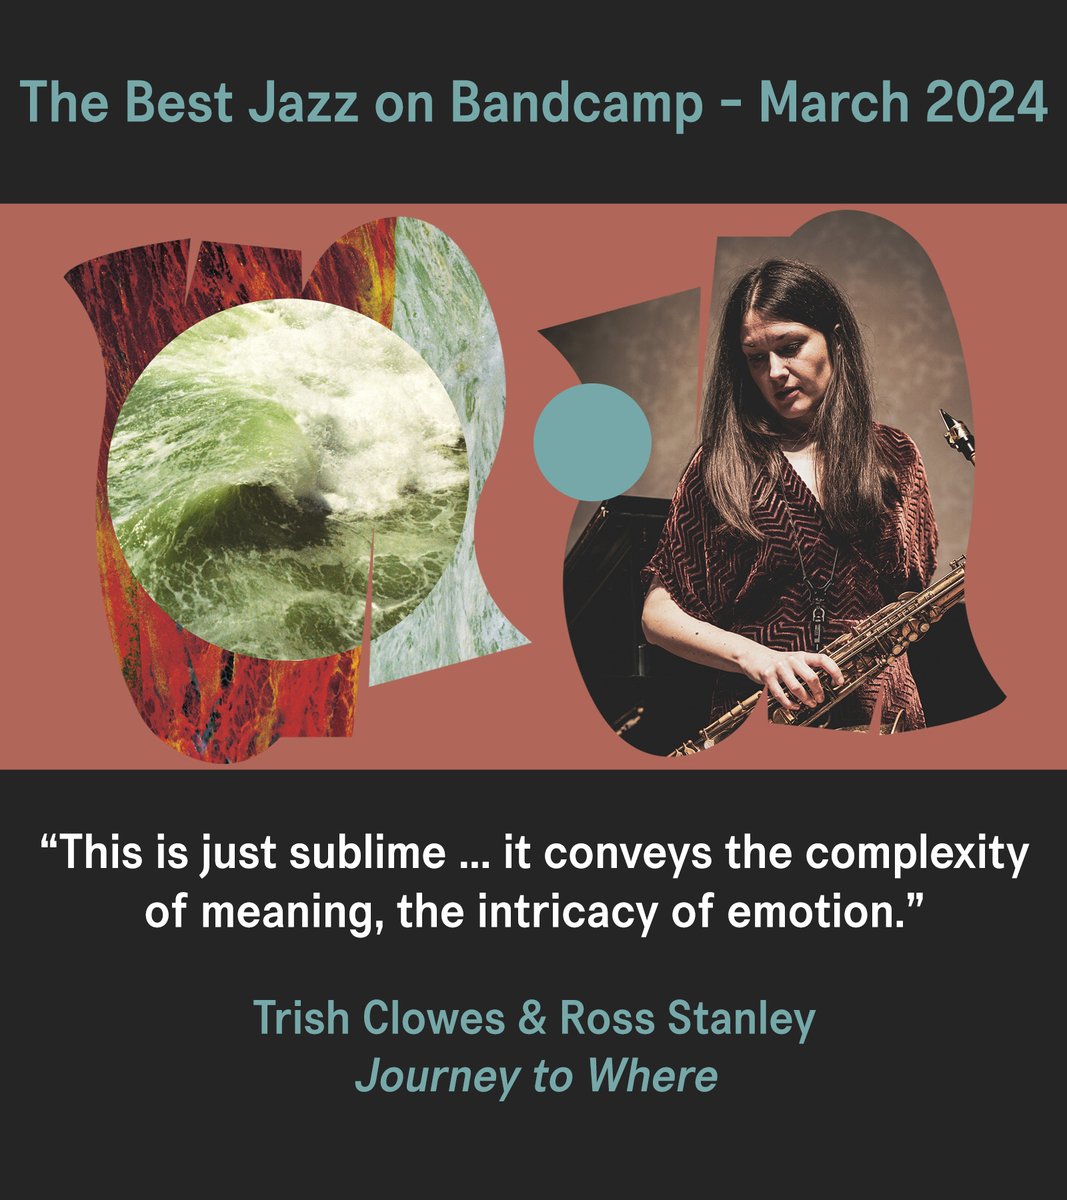 'This is just sublime ...' Thanks @Bandcamp for featuring @trishclowes & Ross Stanley's Journey to Where